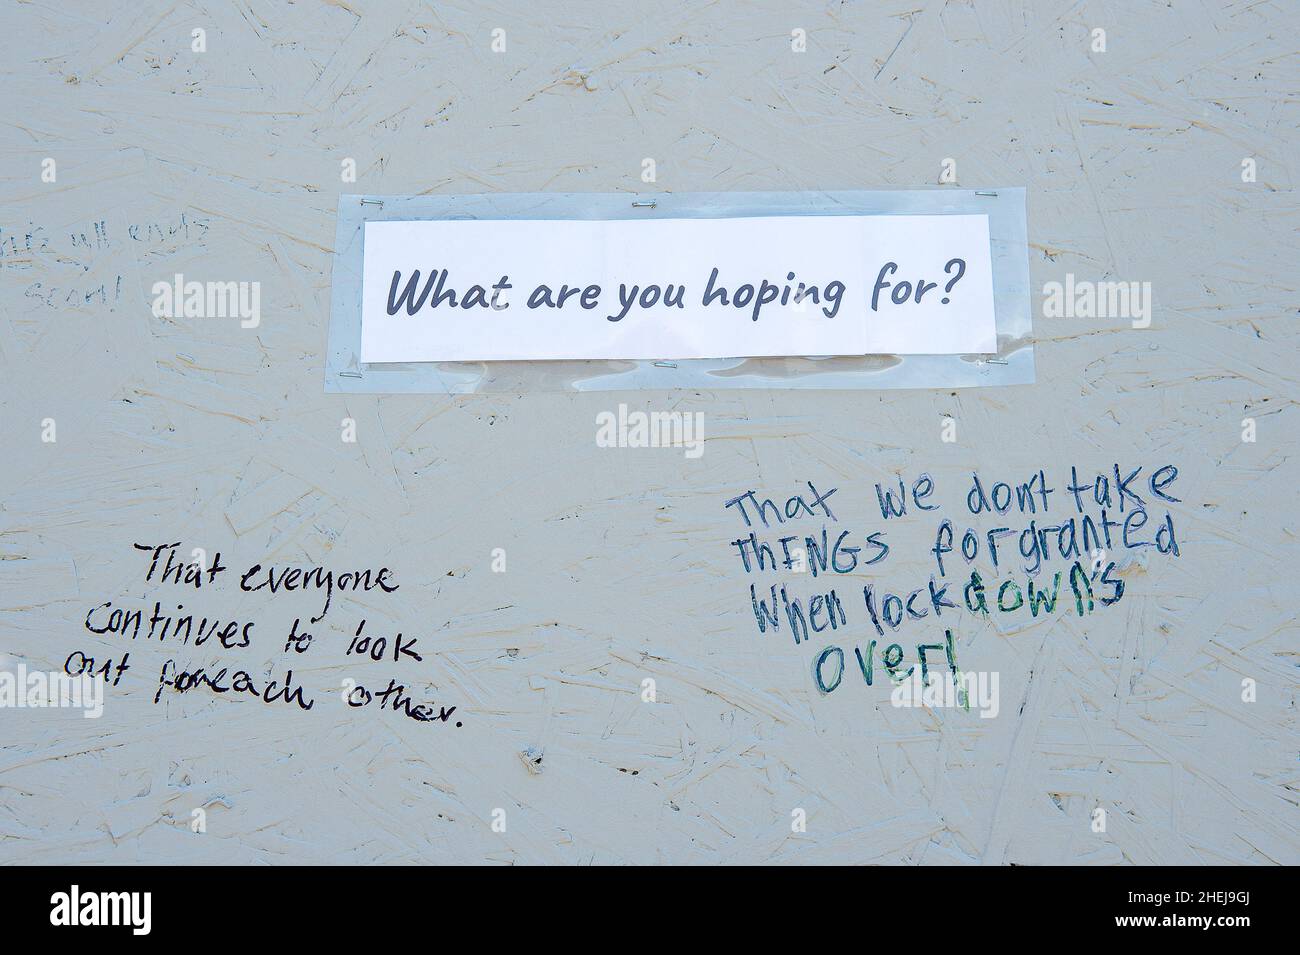 Egham, Surrey, UK. 20th May, 2020. Messages outside St John's Church in Egham, Surrey about what people are looking forward to and what they are hoping for during the Coronavirus Covid-19 Pandemic lockdown. Credit: Maureen McLean/Alamy Stock Photo